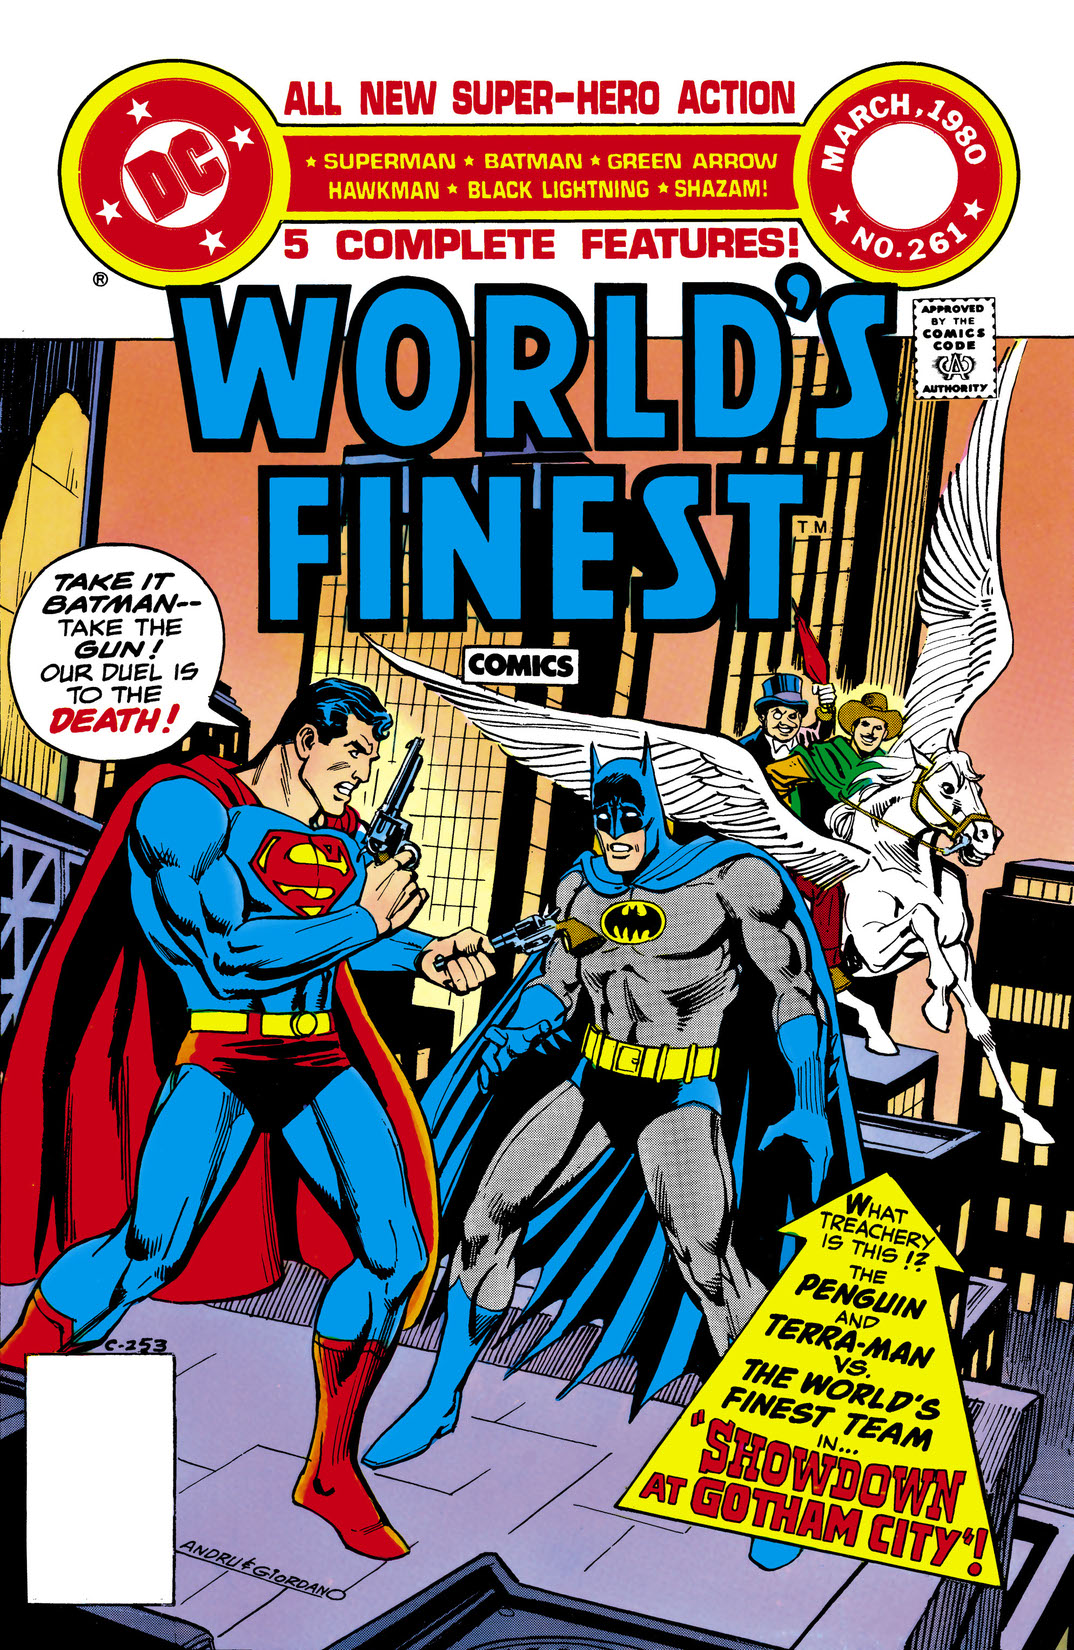 World's Finest Comics (1941-) #261 preview images